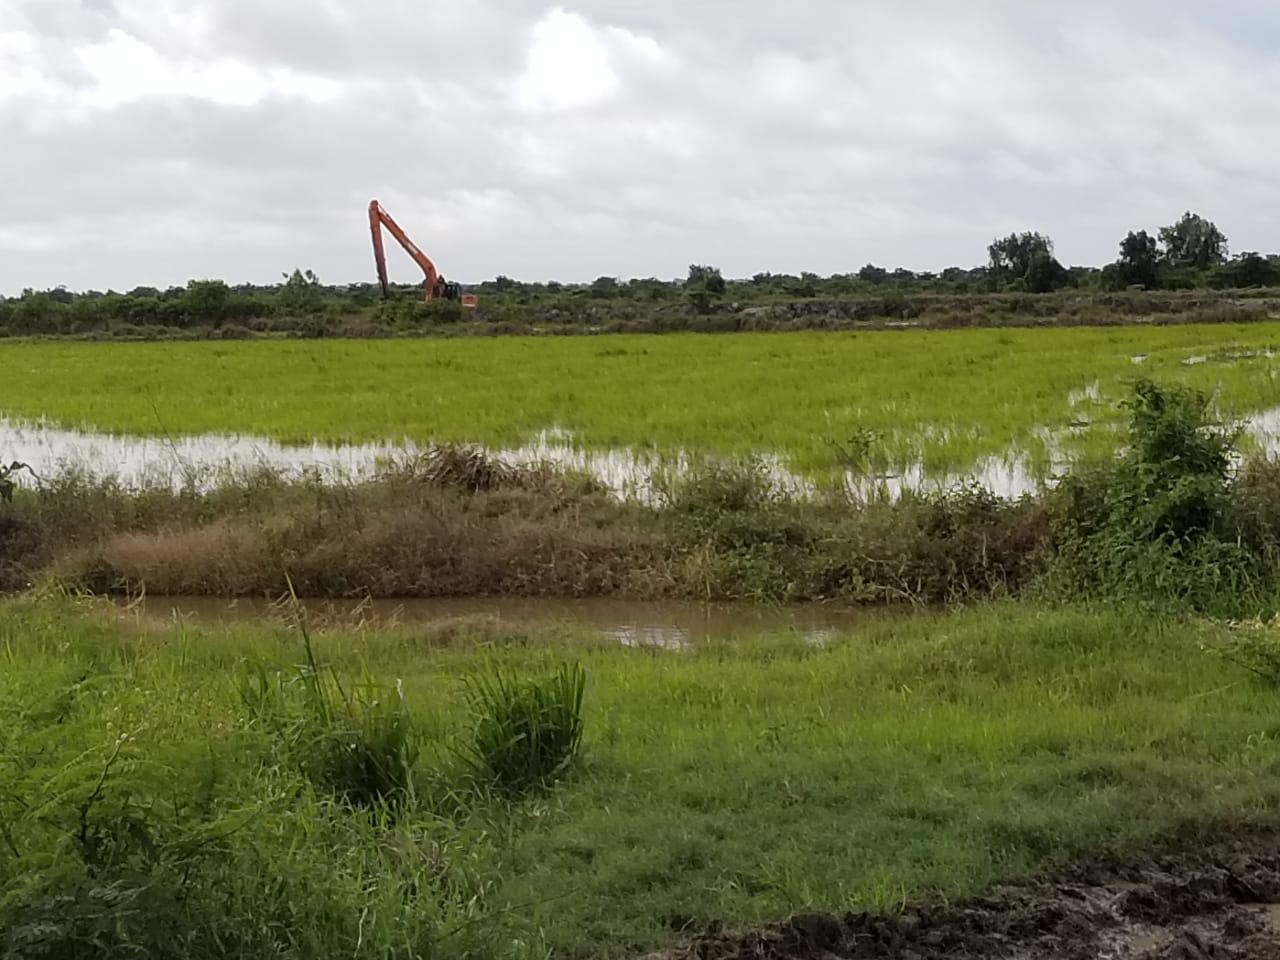 An excavator being deployed to strengthen the floor embankment to prevent water from overflowing into the rice field